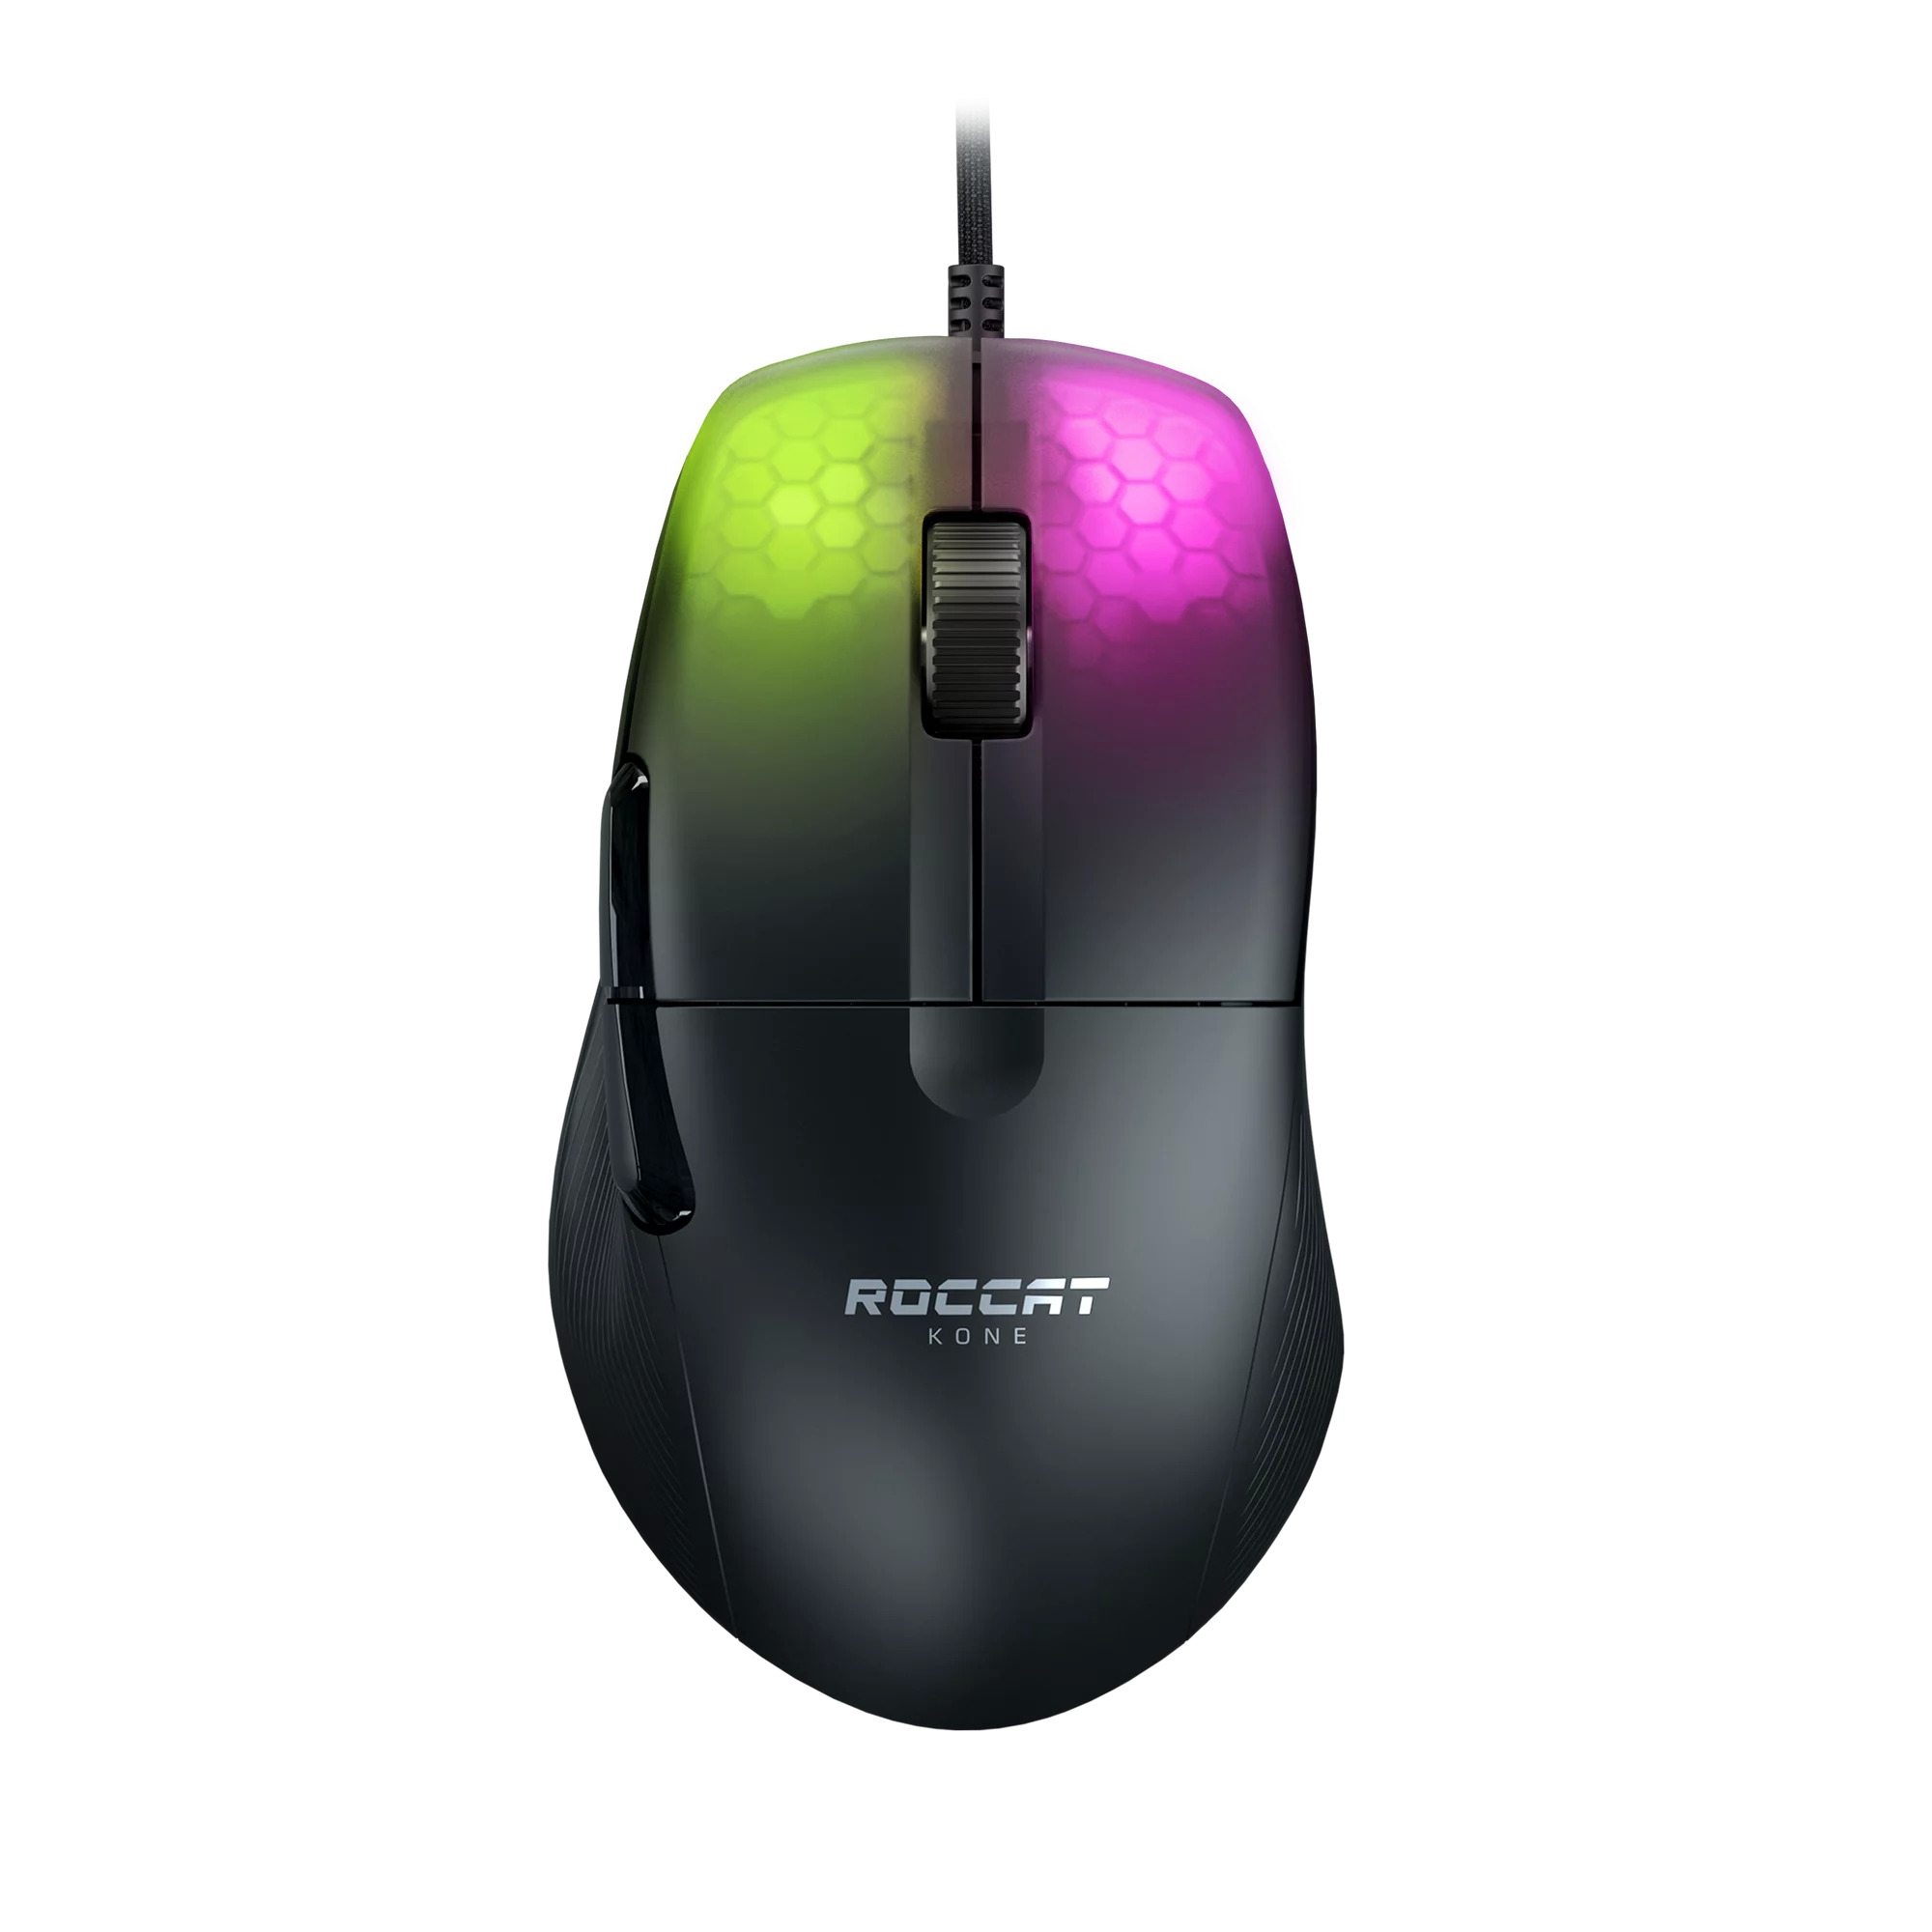 ROCCAT Kone Pro PC Wired Gaming Mouse (Black) $30 + Free S&H w/ Walmart+ or $35+